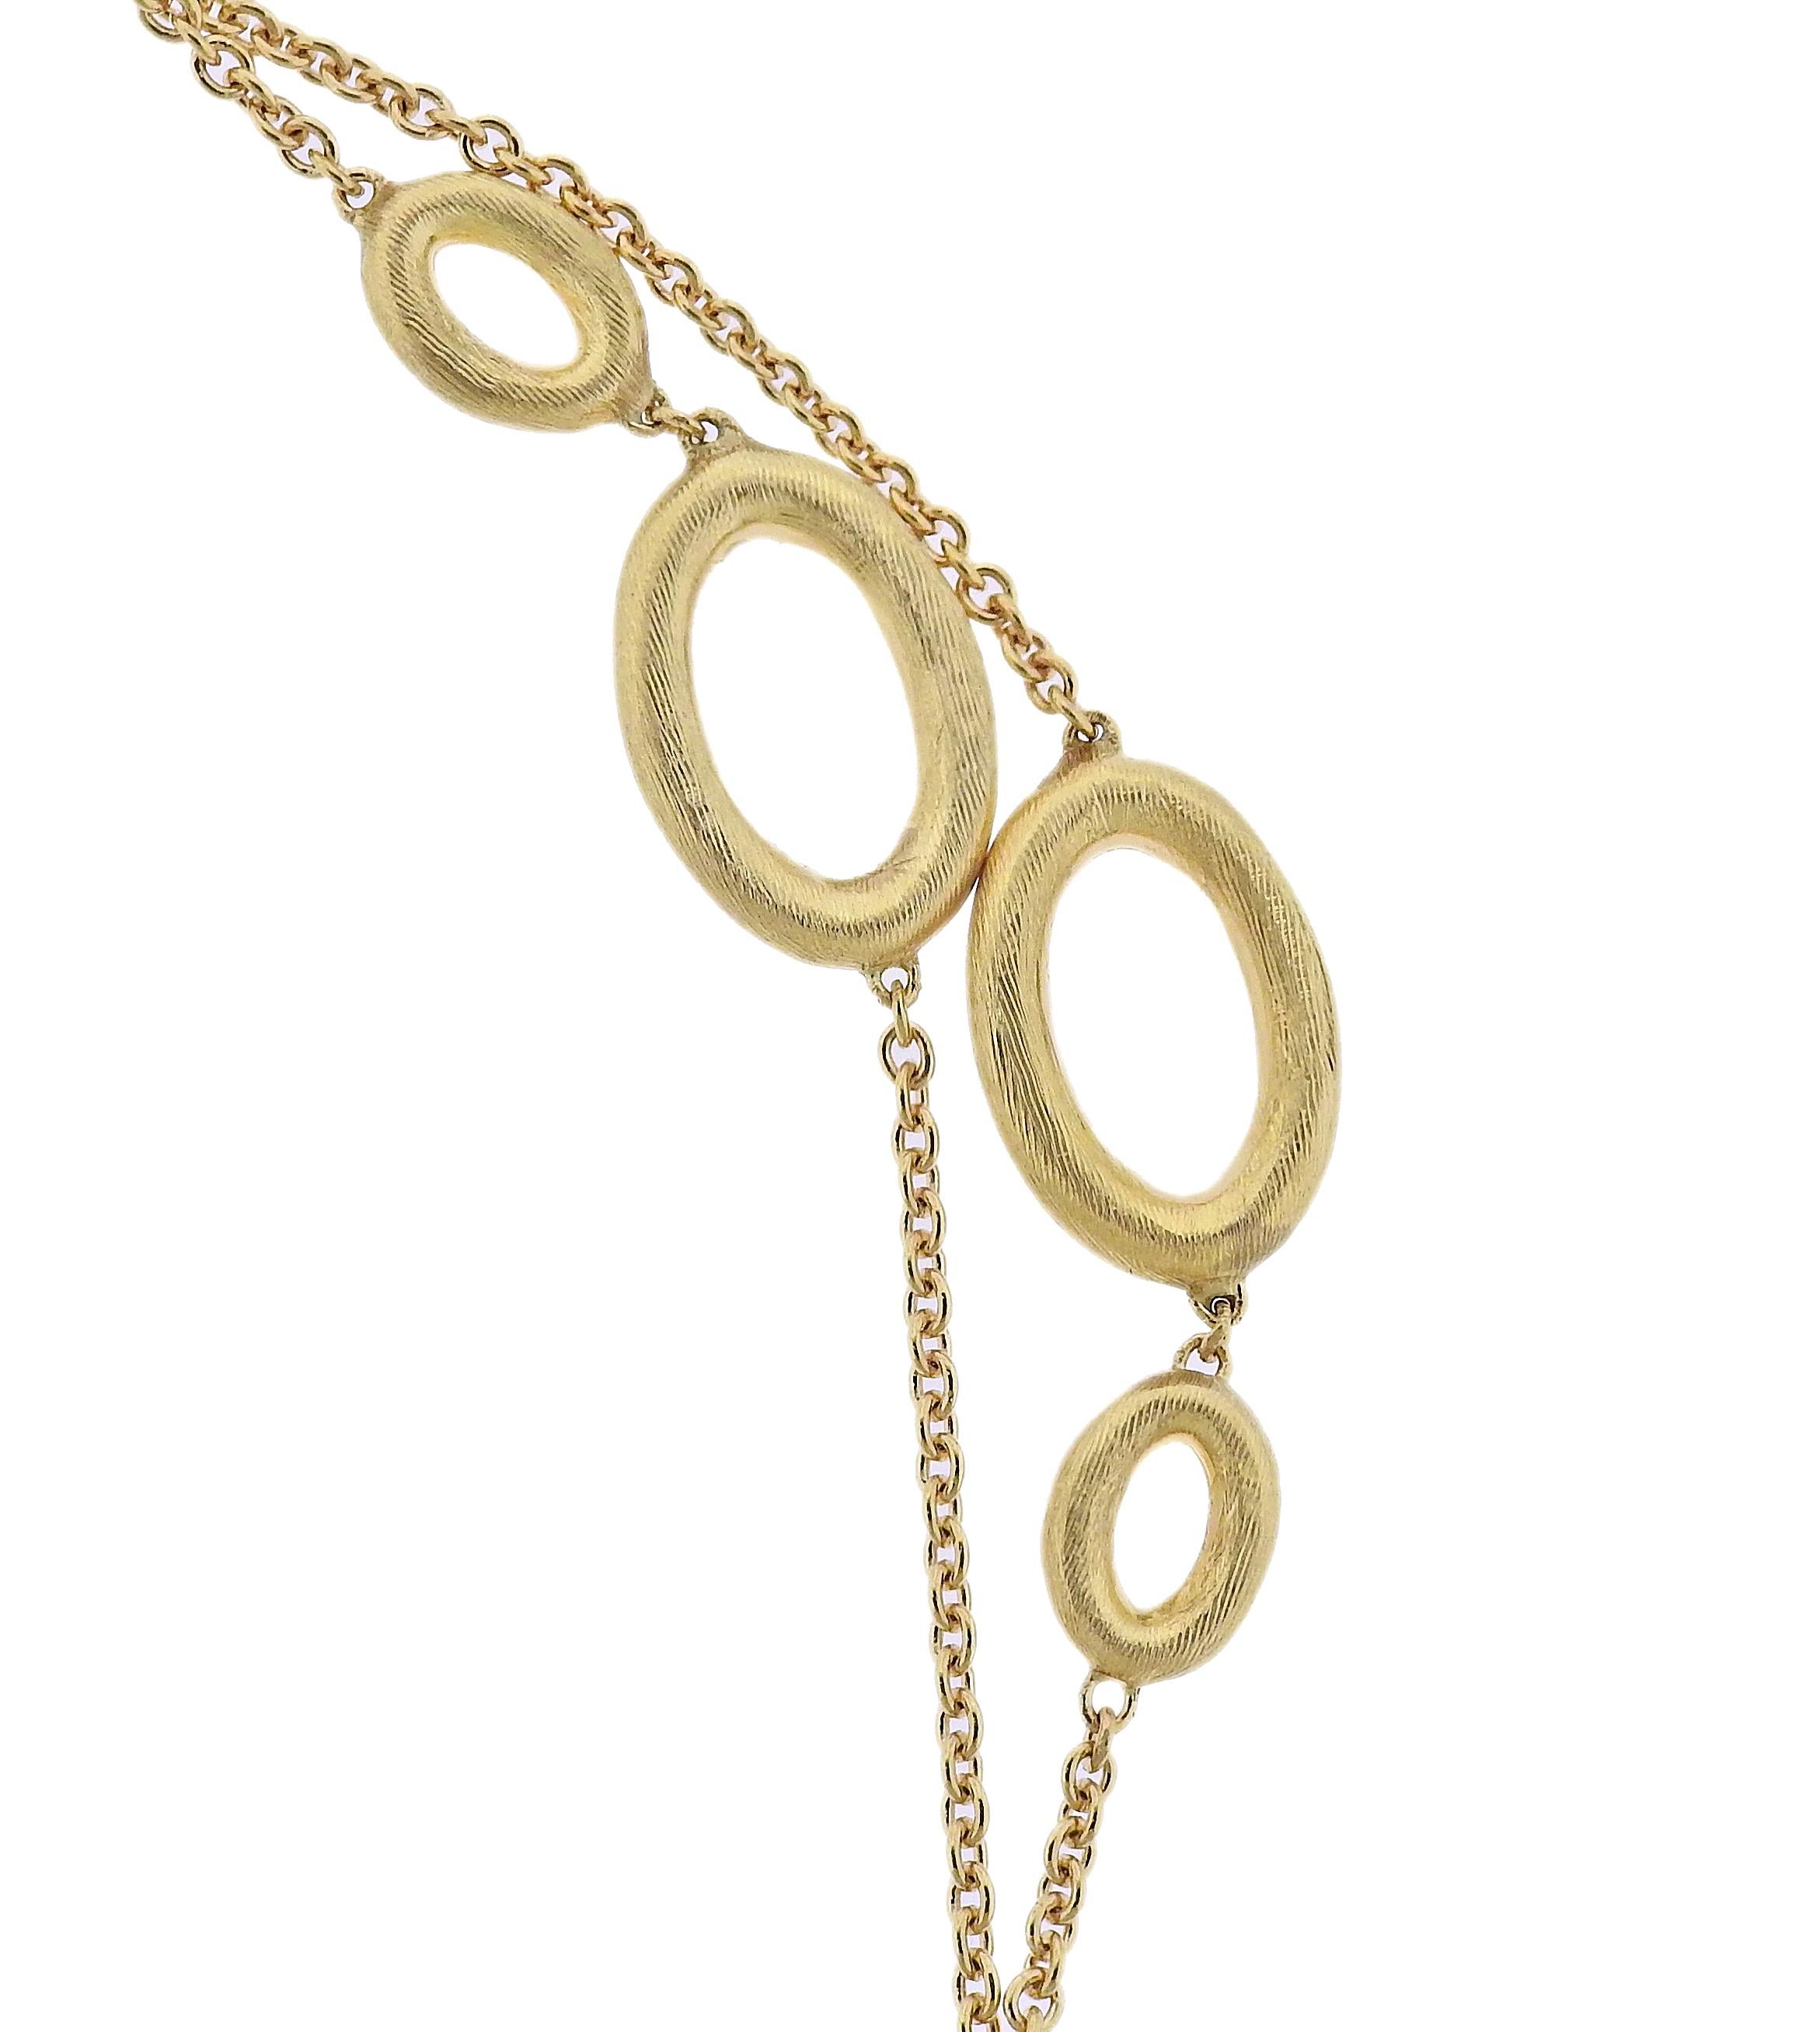 Women's Marco Bicego Siviglia 18k Gold Long Oval Link Necklace For Sale